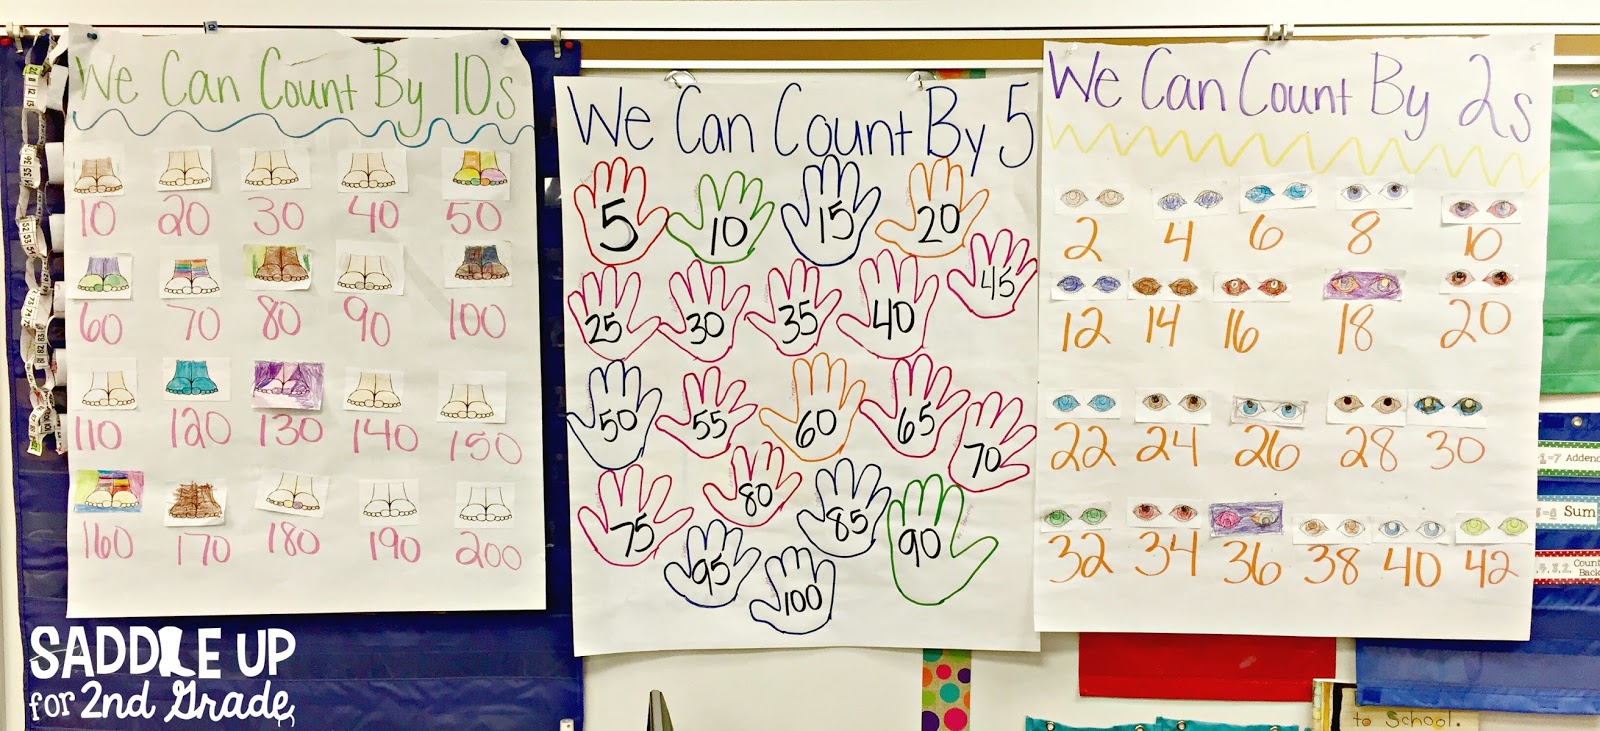 Skip counting anchor charts for counting by 2s, 5s, and 10s